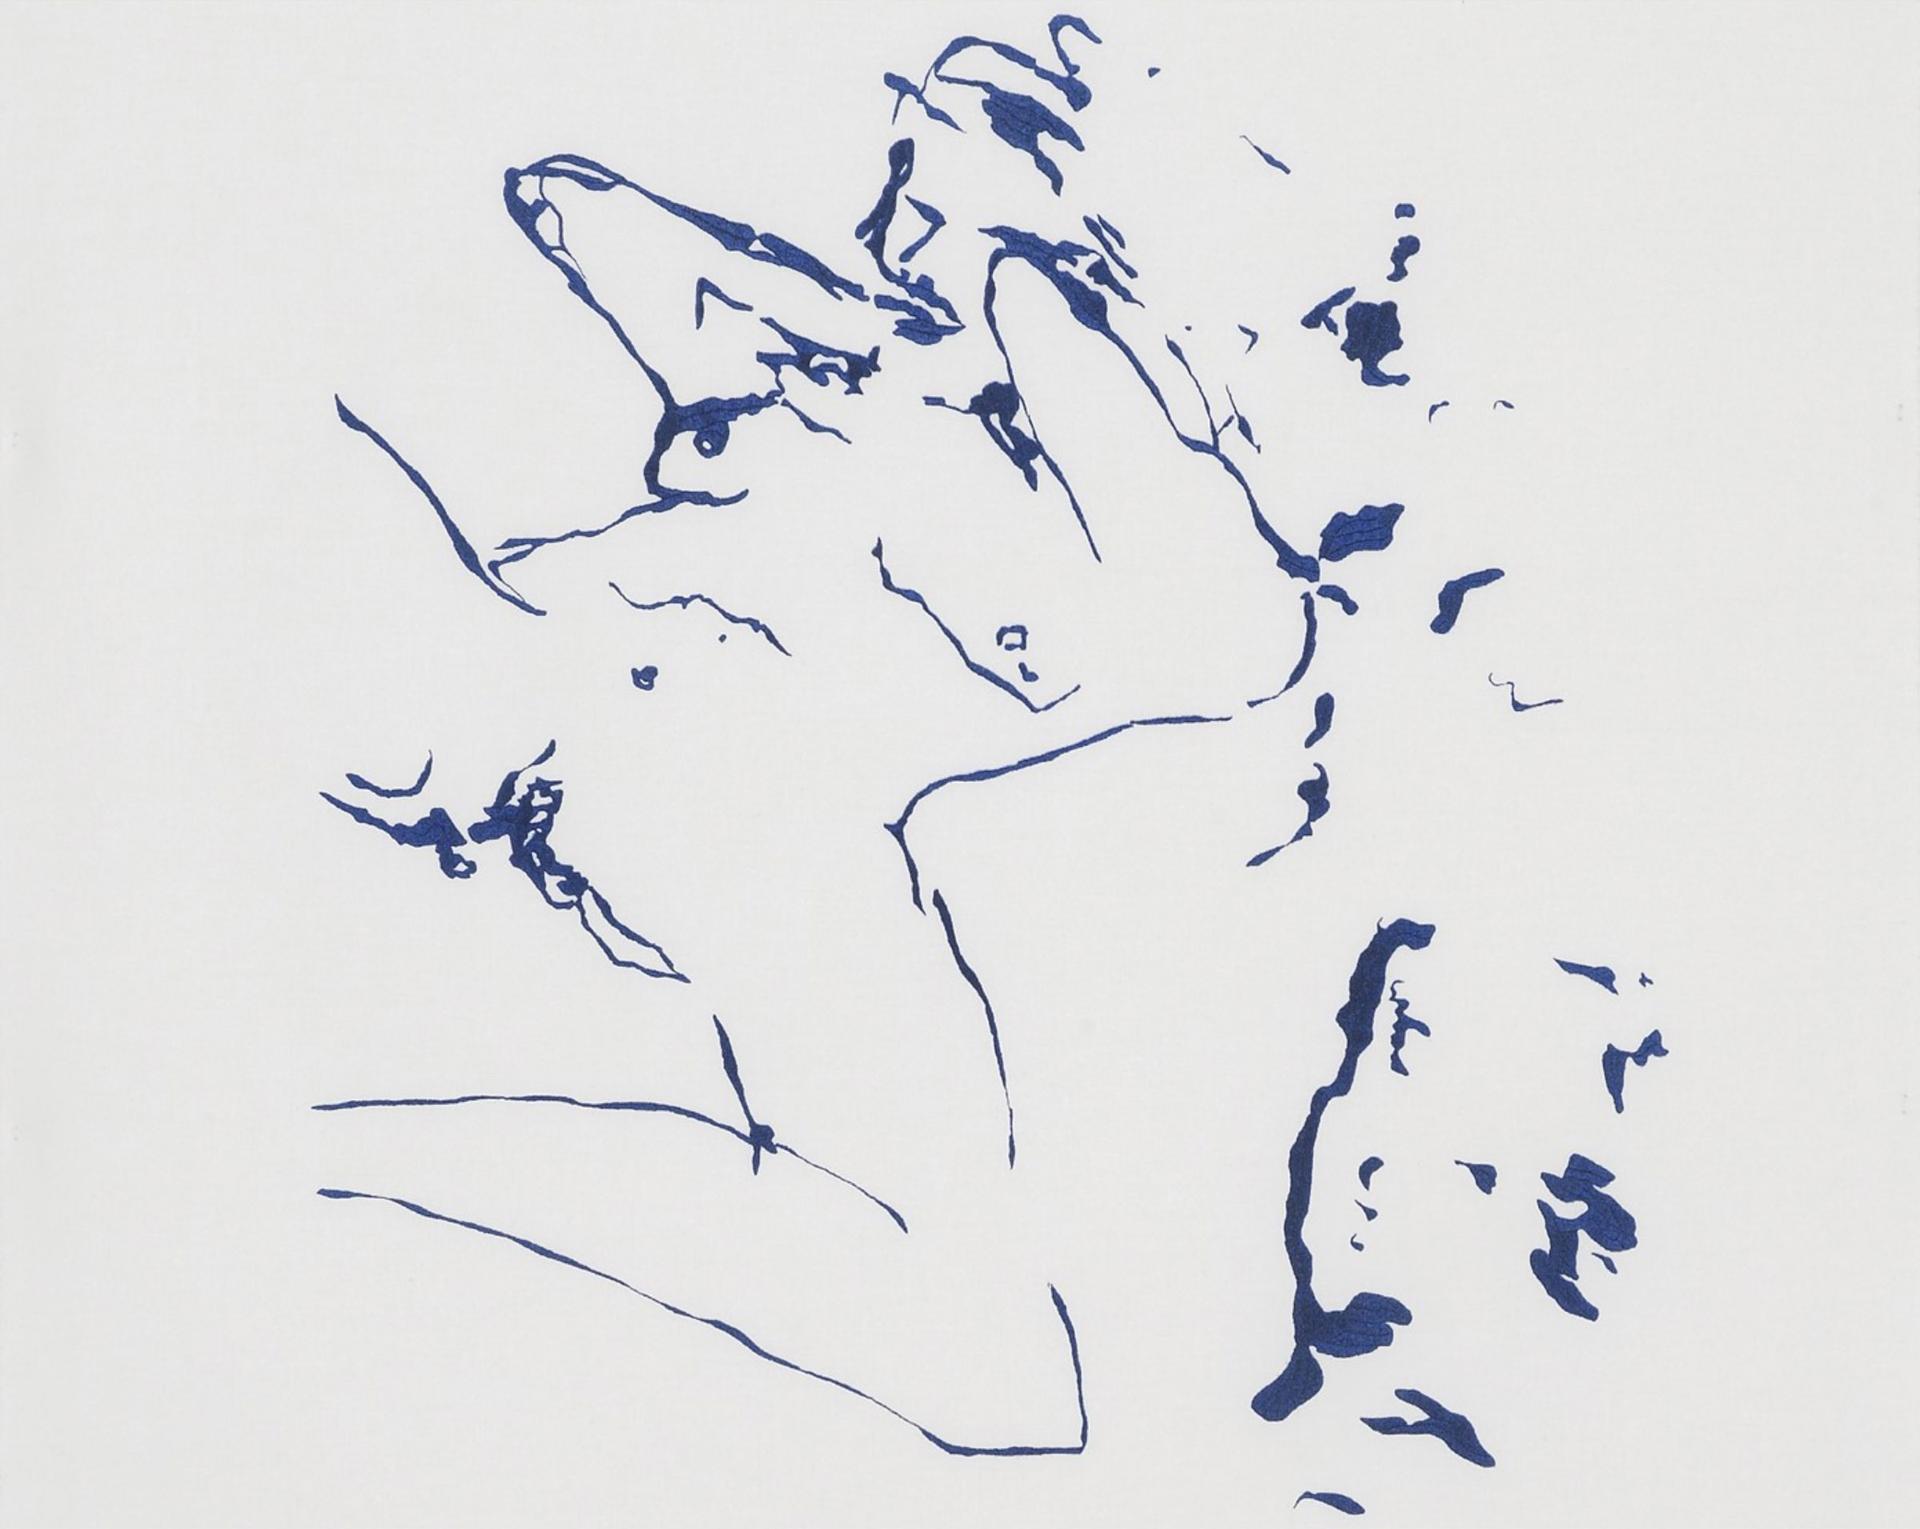 Tracey Emin - The Beginning Of Me, 2012